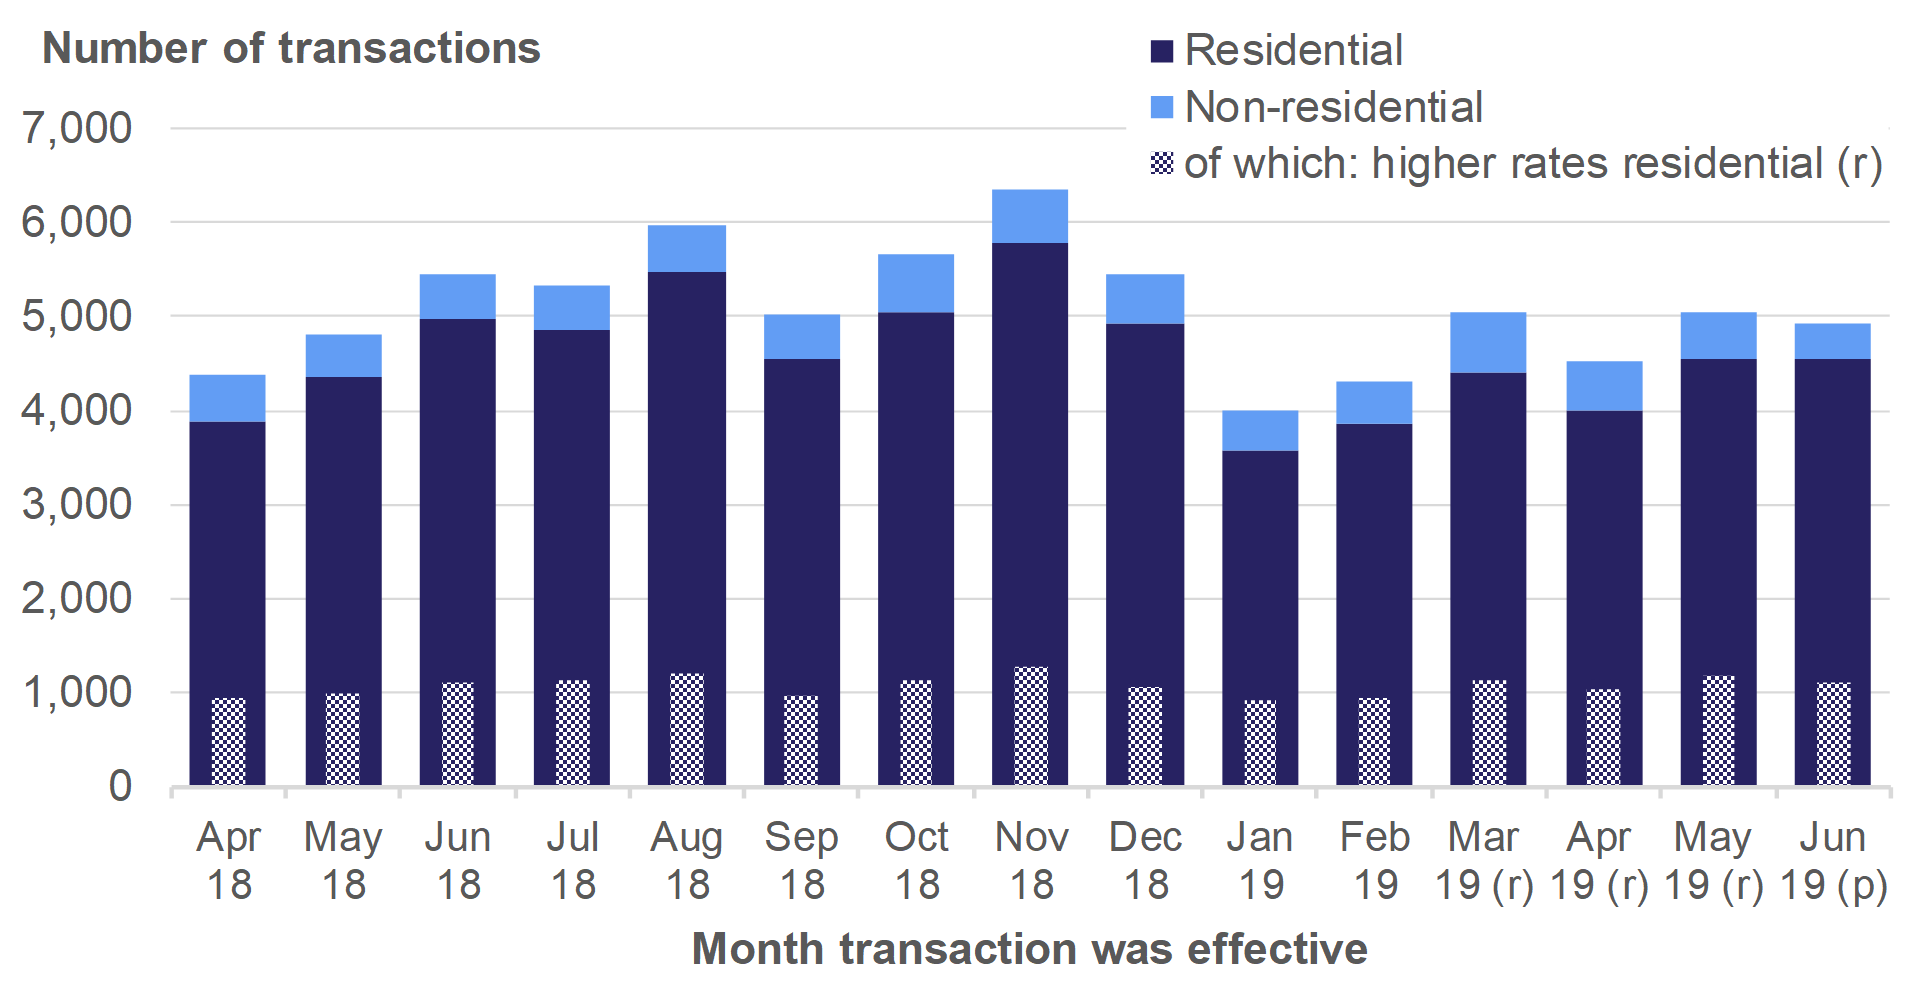 Figure 2.4 shows the monthly numbers of reported notifiable transactions from April 2018 to June 2019, for residential and non-residential transactions.